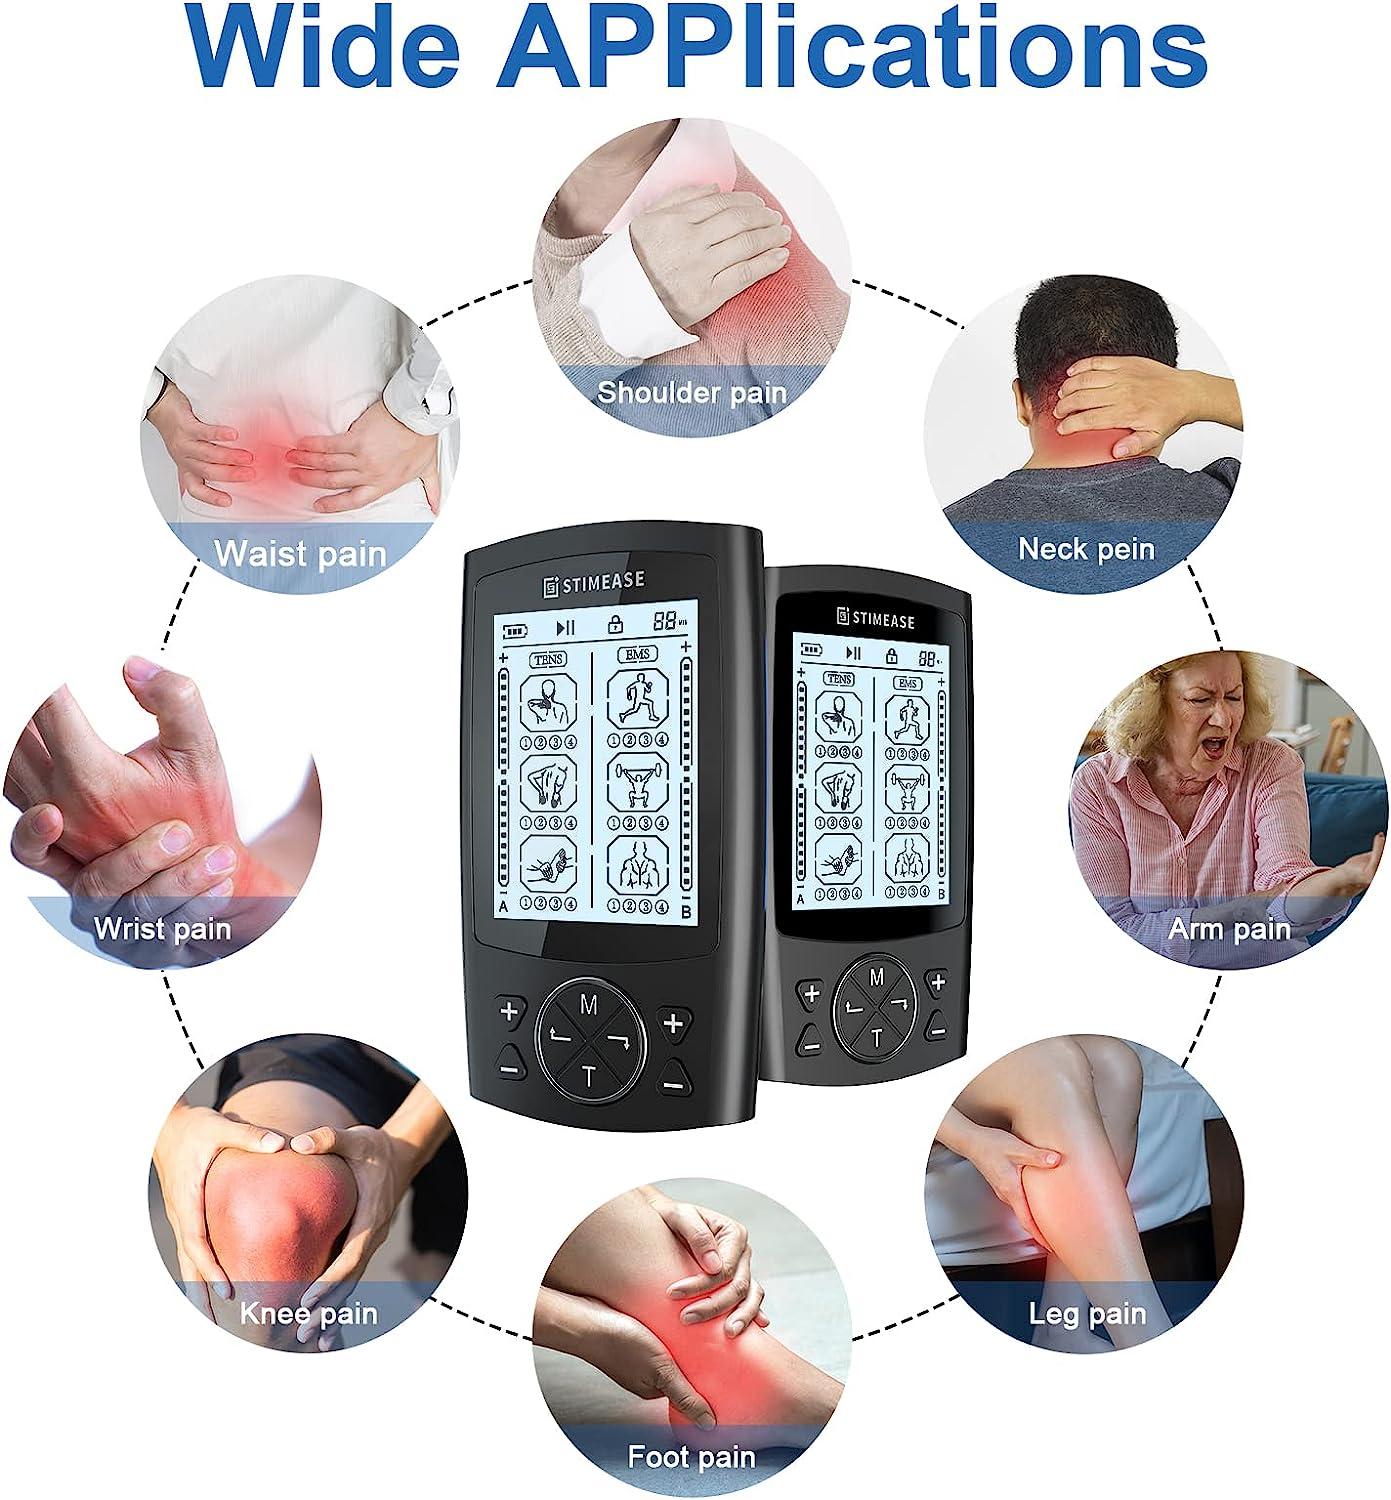  TENS Unit & EMS Muscle Stimulator, for Sciatica Pain Relief,  Neck Pain, Back Pain Relief. Portable Stim Machine for Muscle Recovery.  Tens Machine